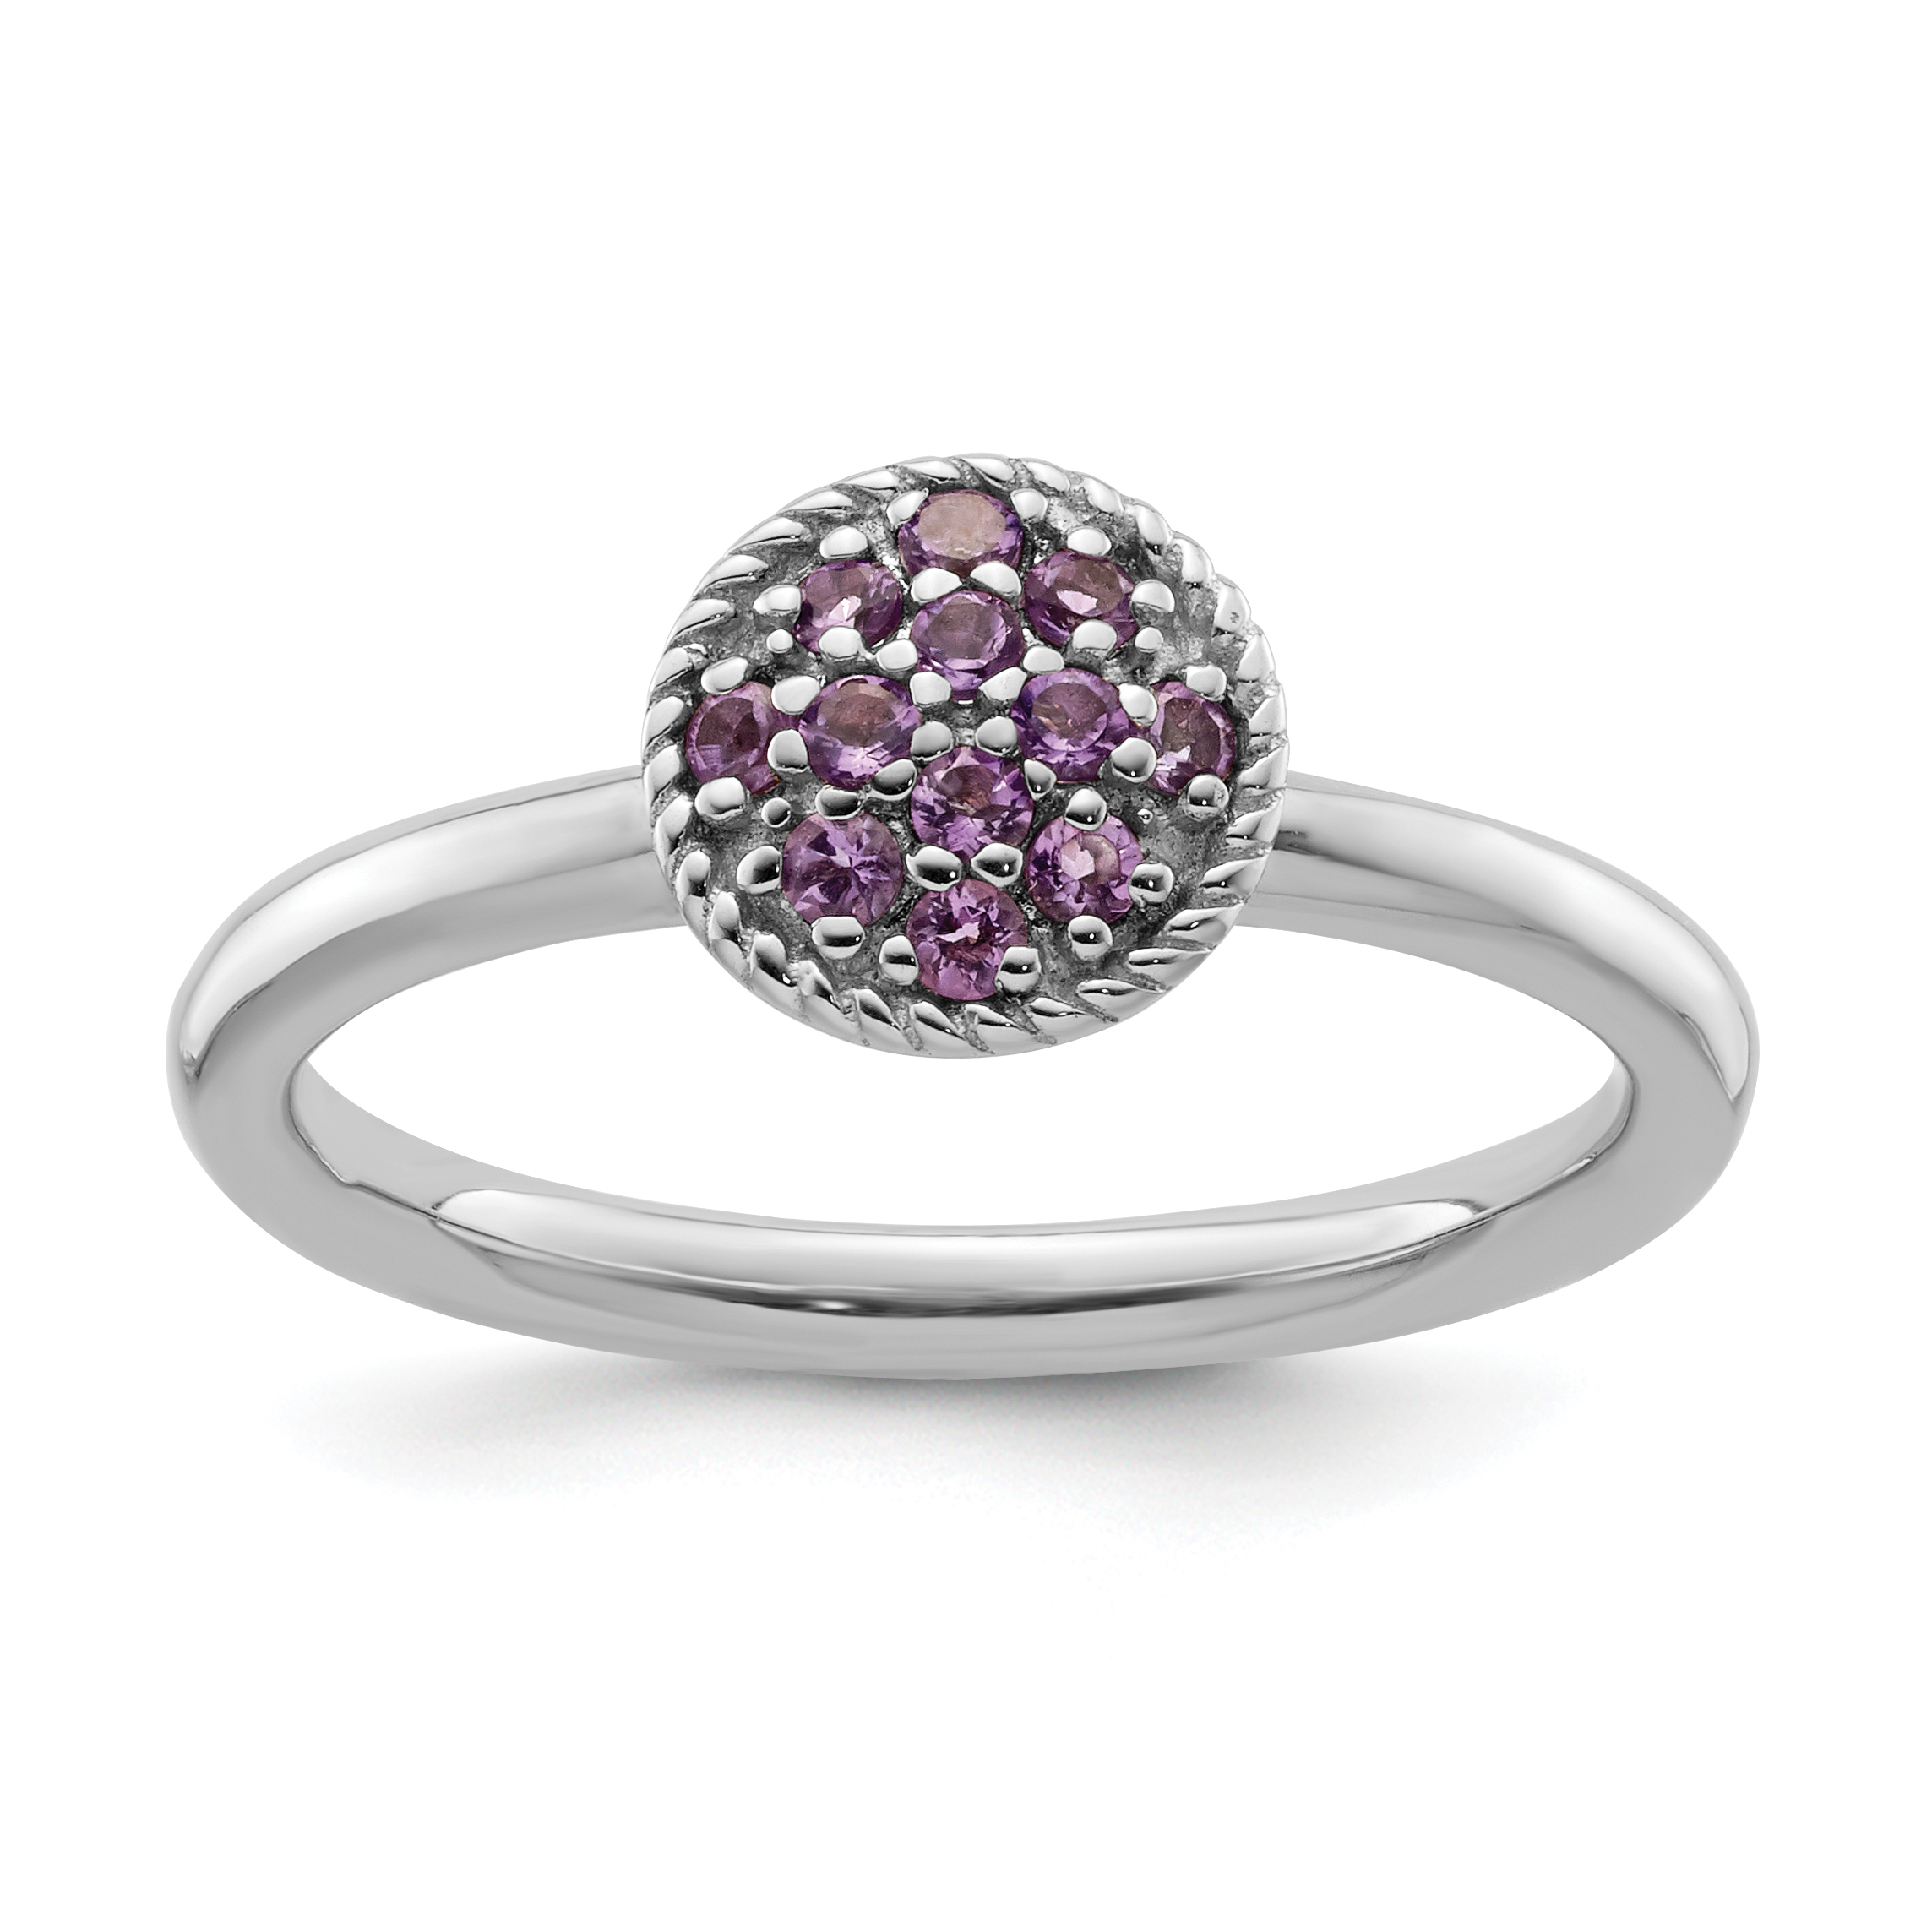 Stackable Expressions Sterling Silver Stackable Expressions Amethyst Rhodium Ring